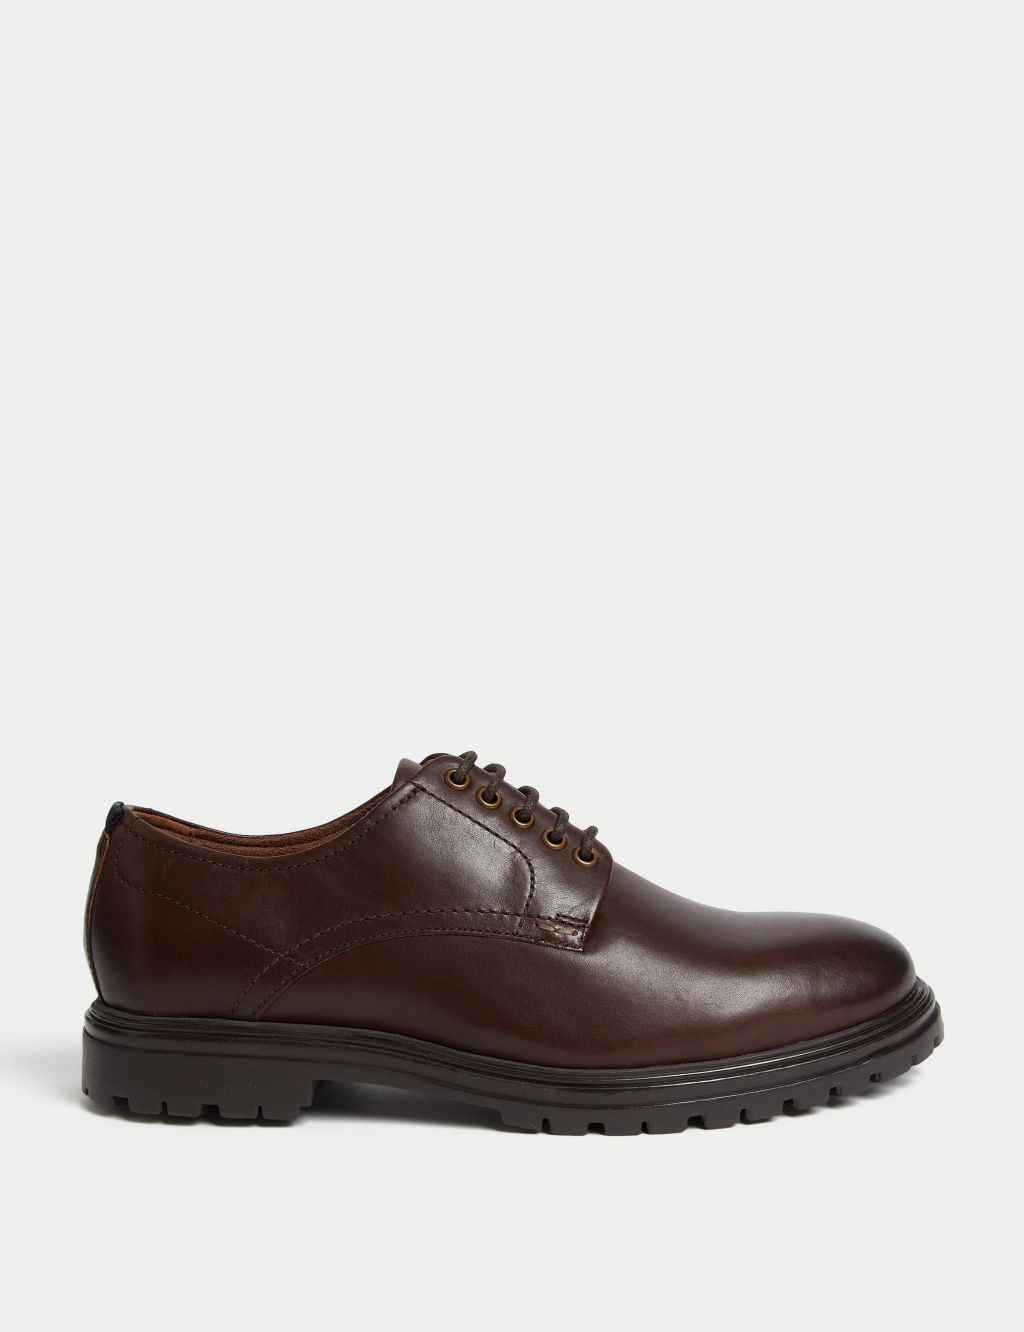 Leather Derby Heritage Shoes image 1